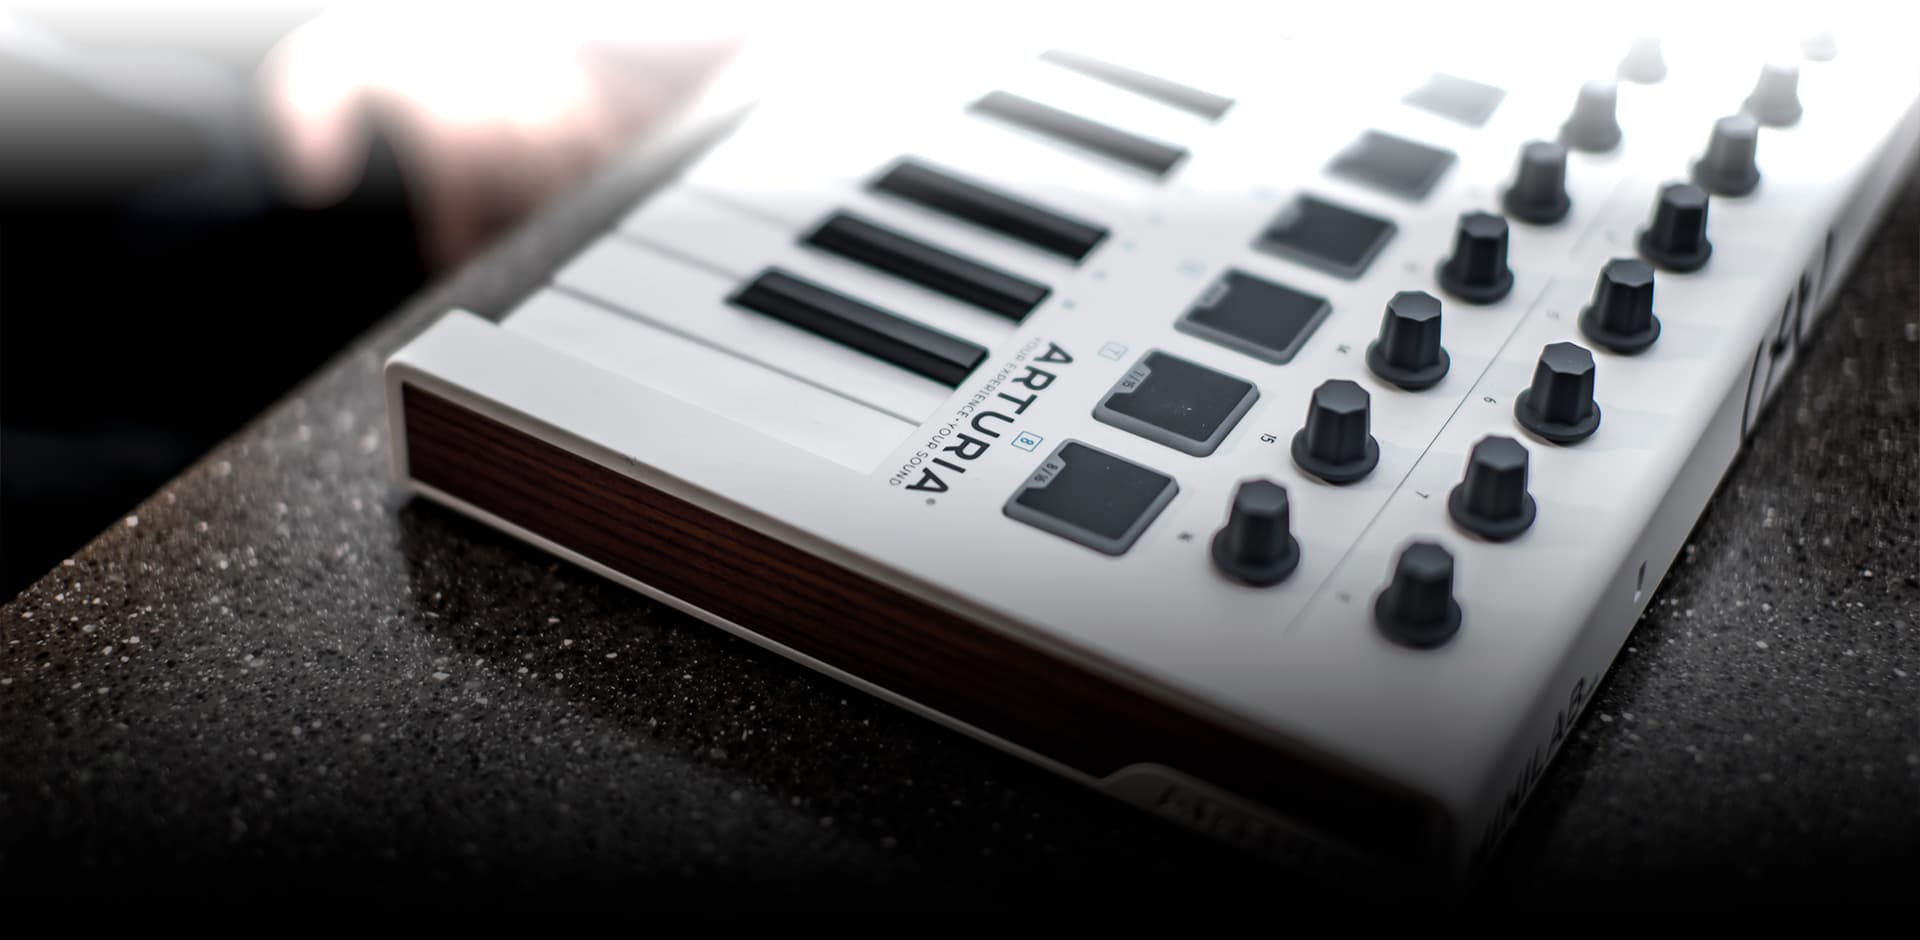 how to assign sounds to midi keyboard